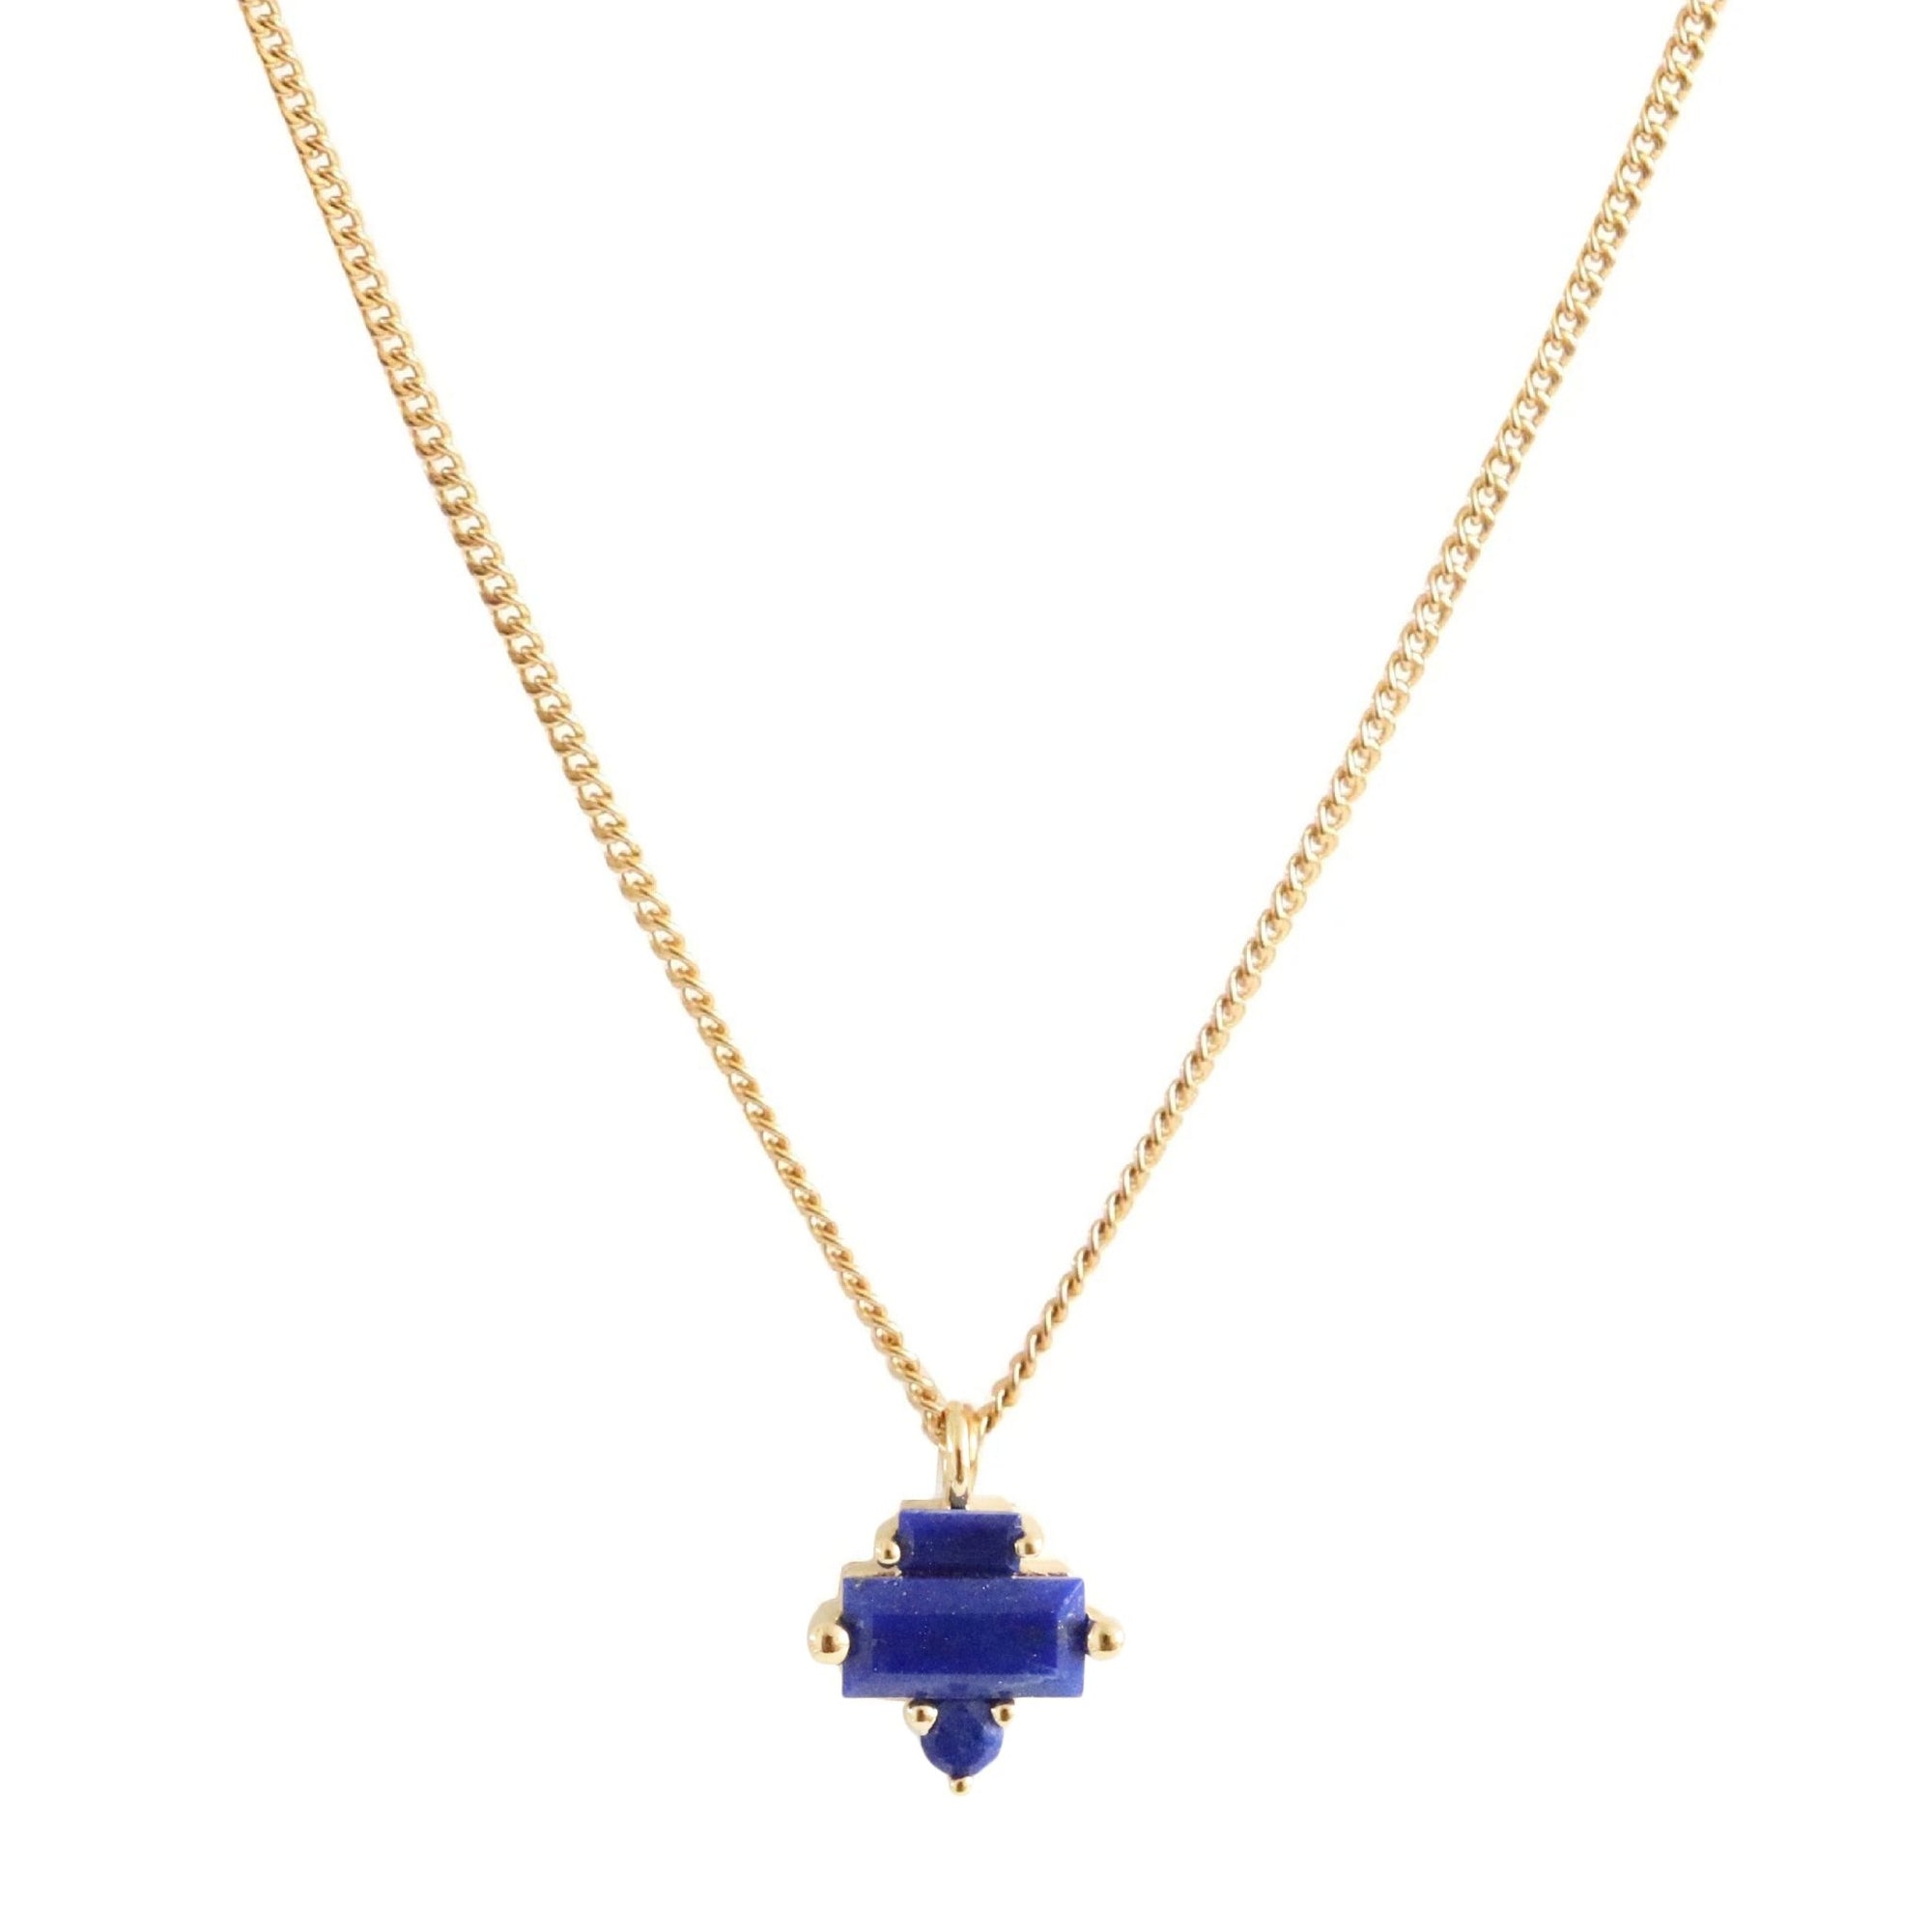 TINY LOYAL PRISM NECKLACE - LAPIS & GOLD - SO PRETTY CARA COTTER